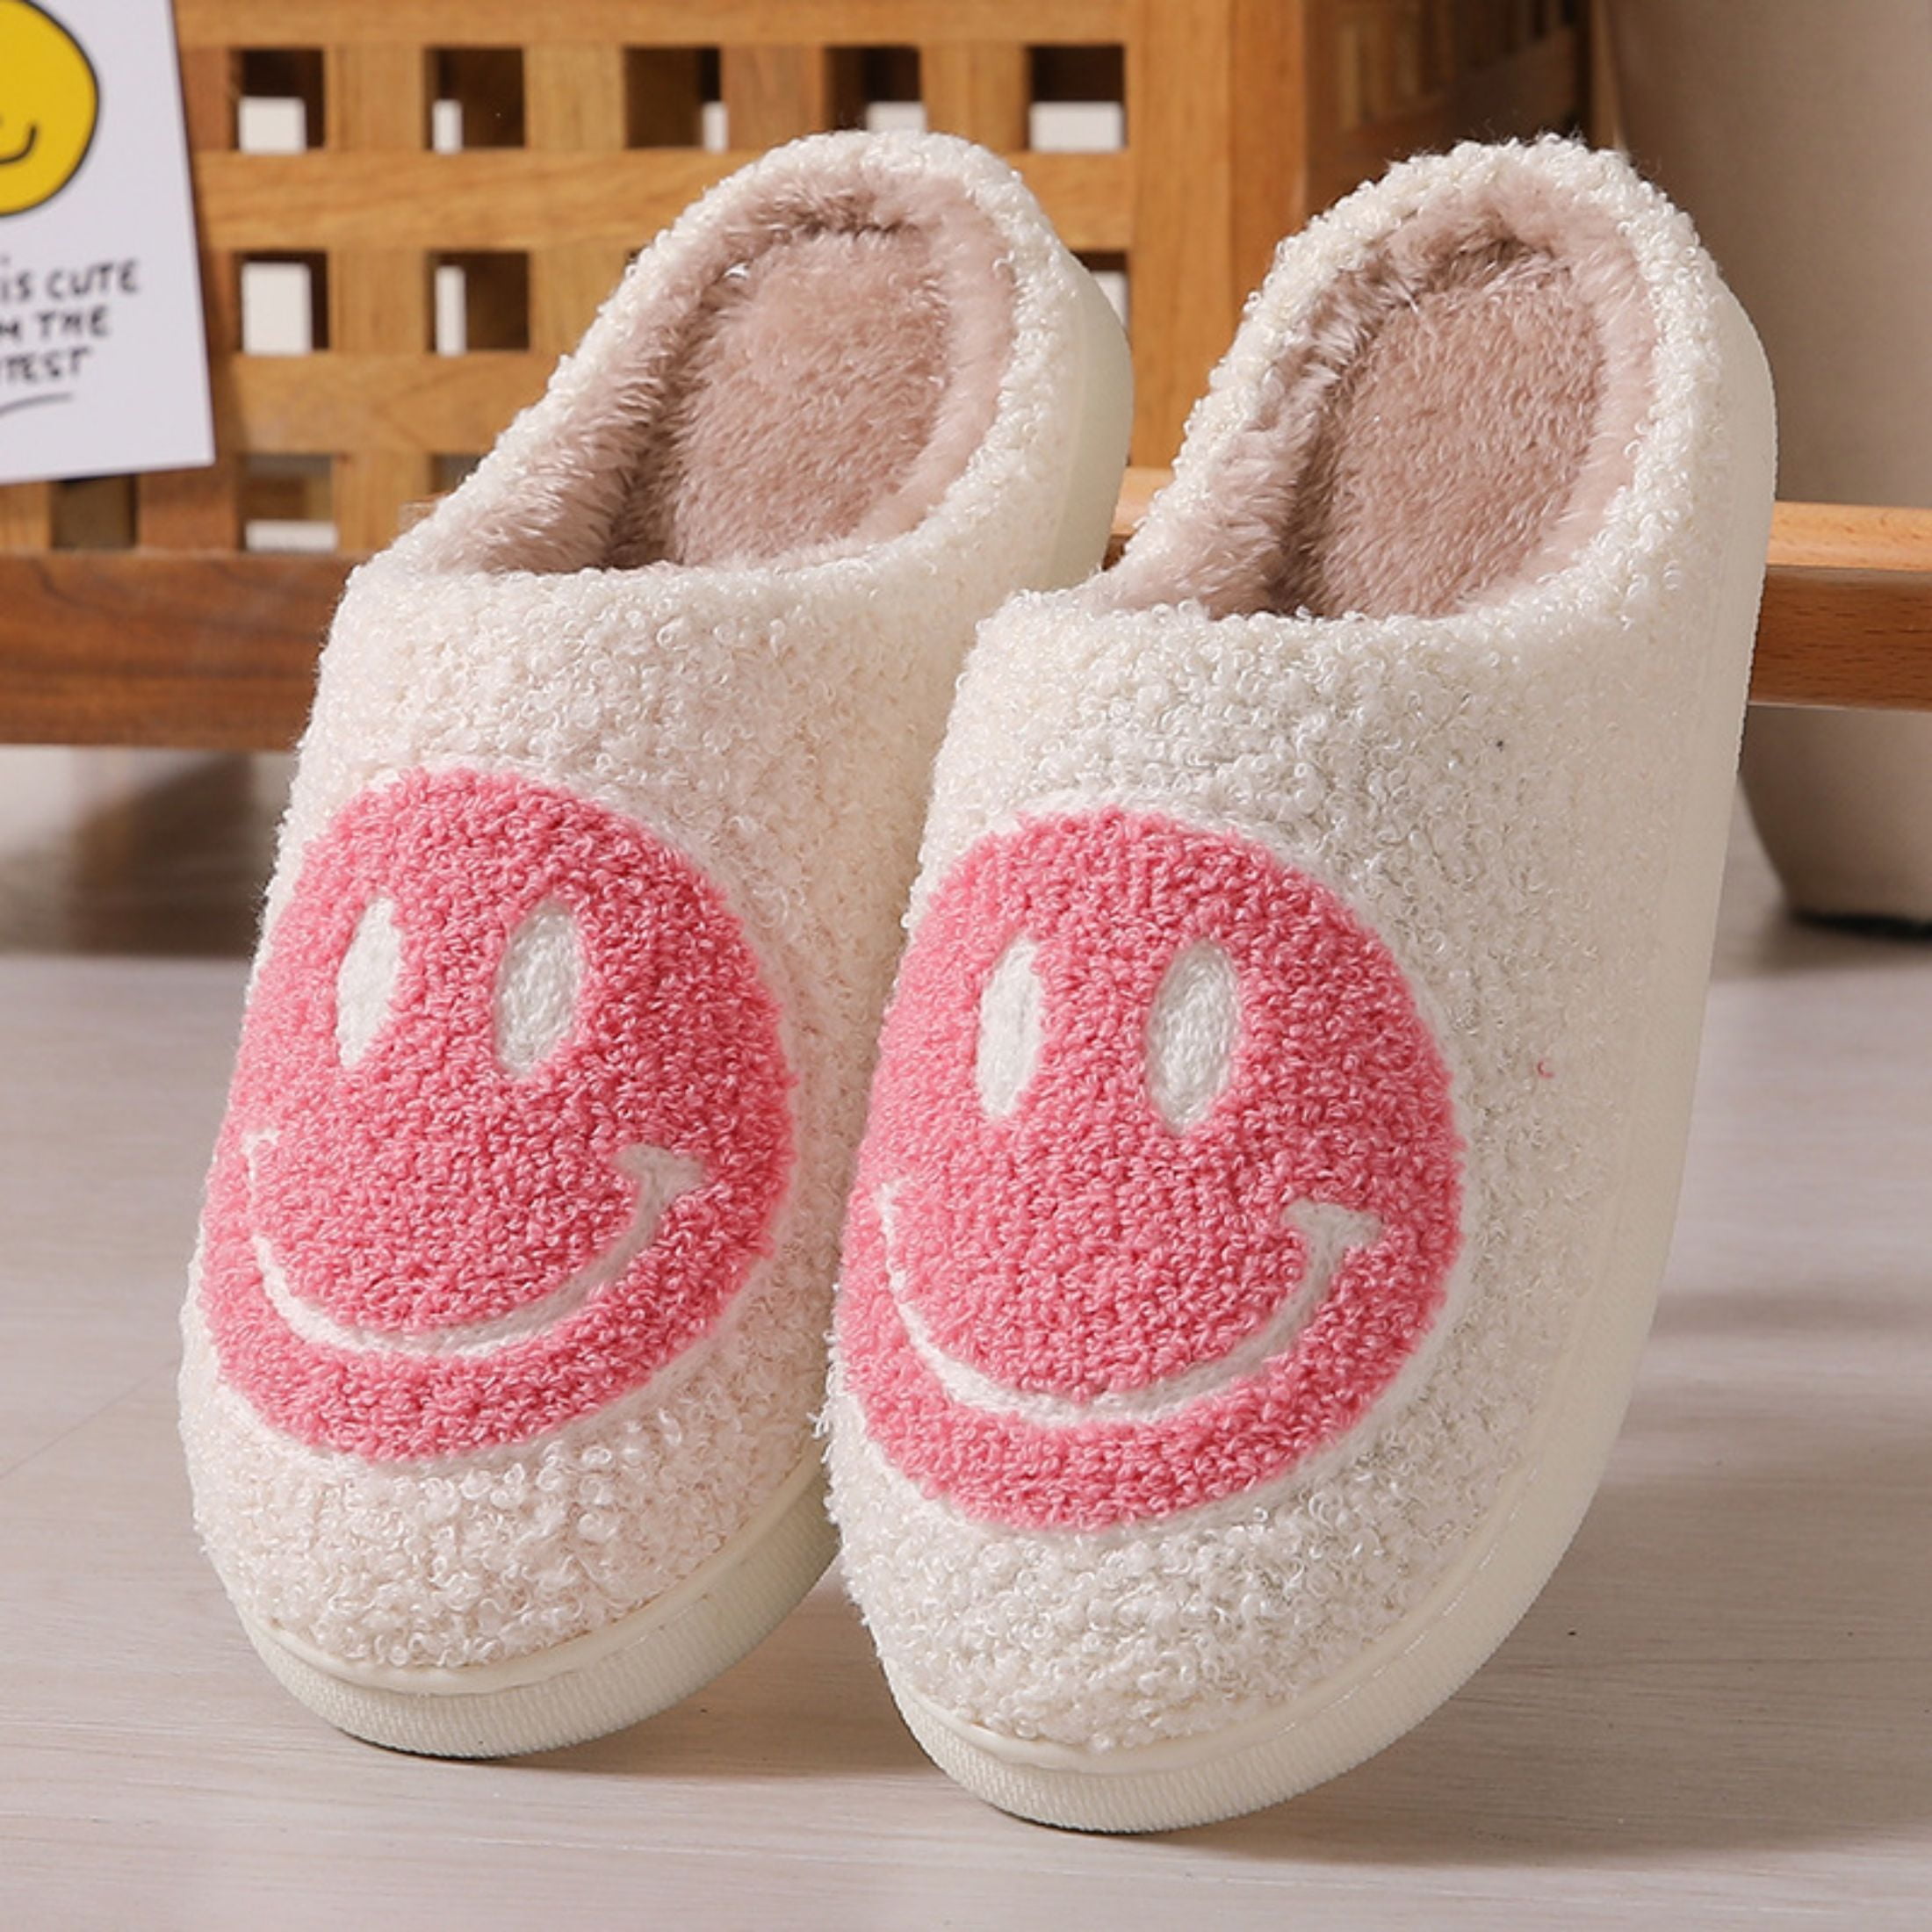 Slippers for Women and Men Furry Slide, Fuzzy